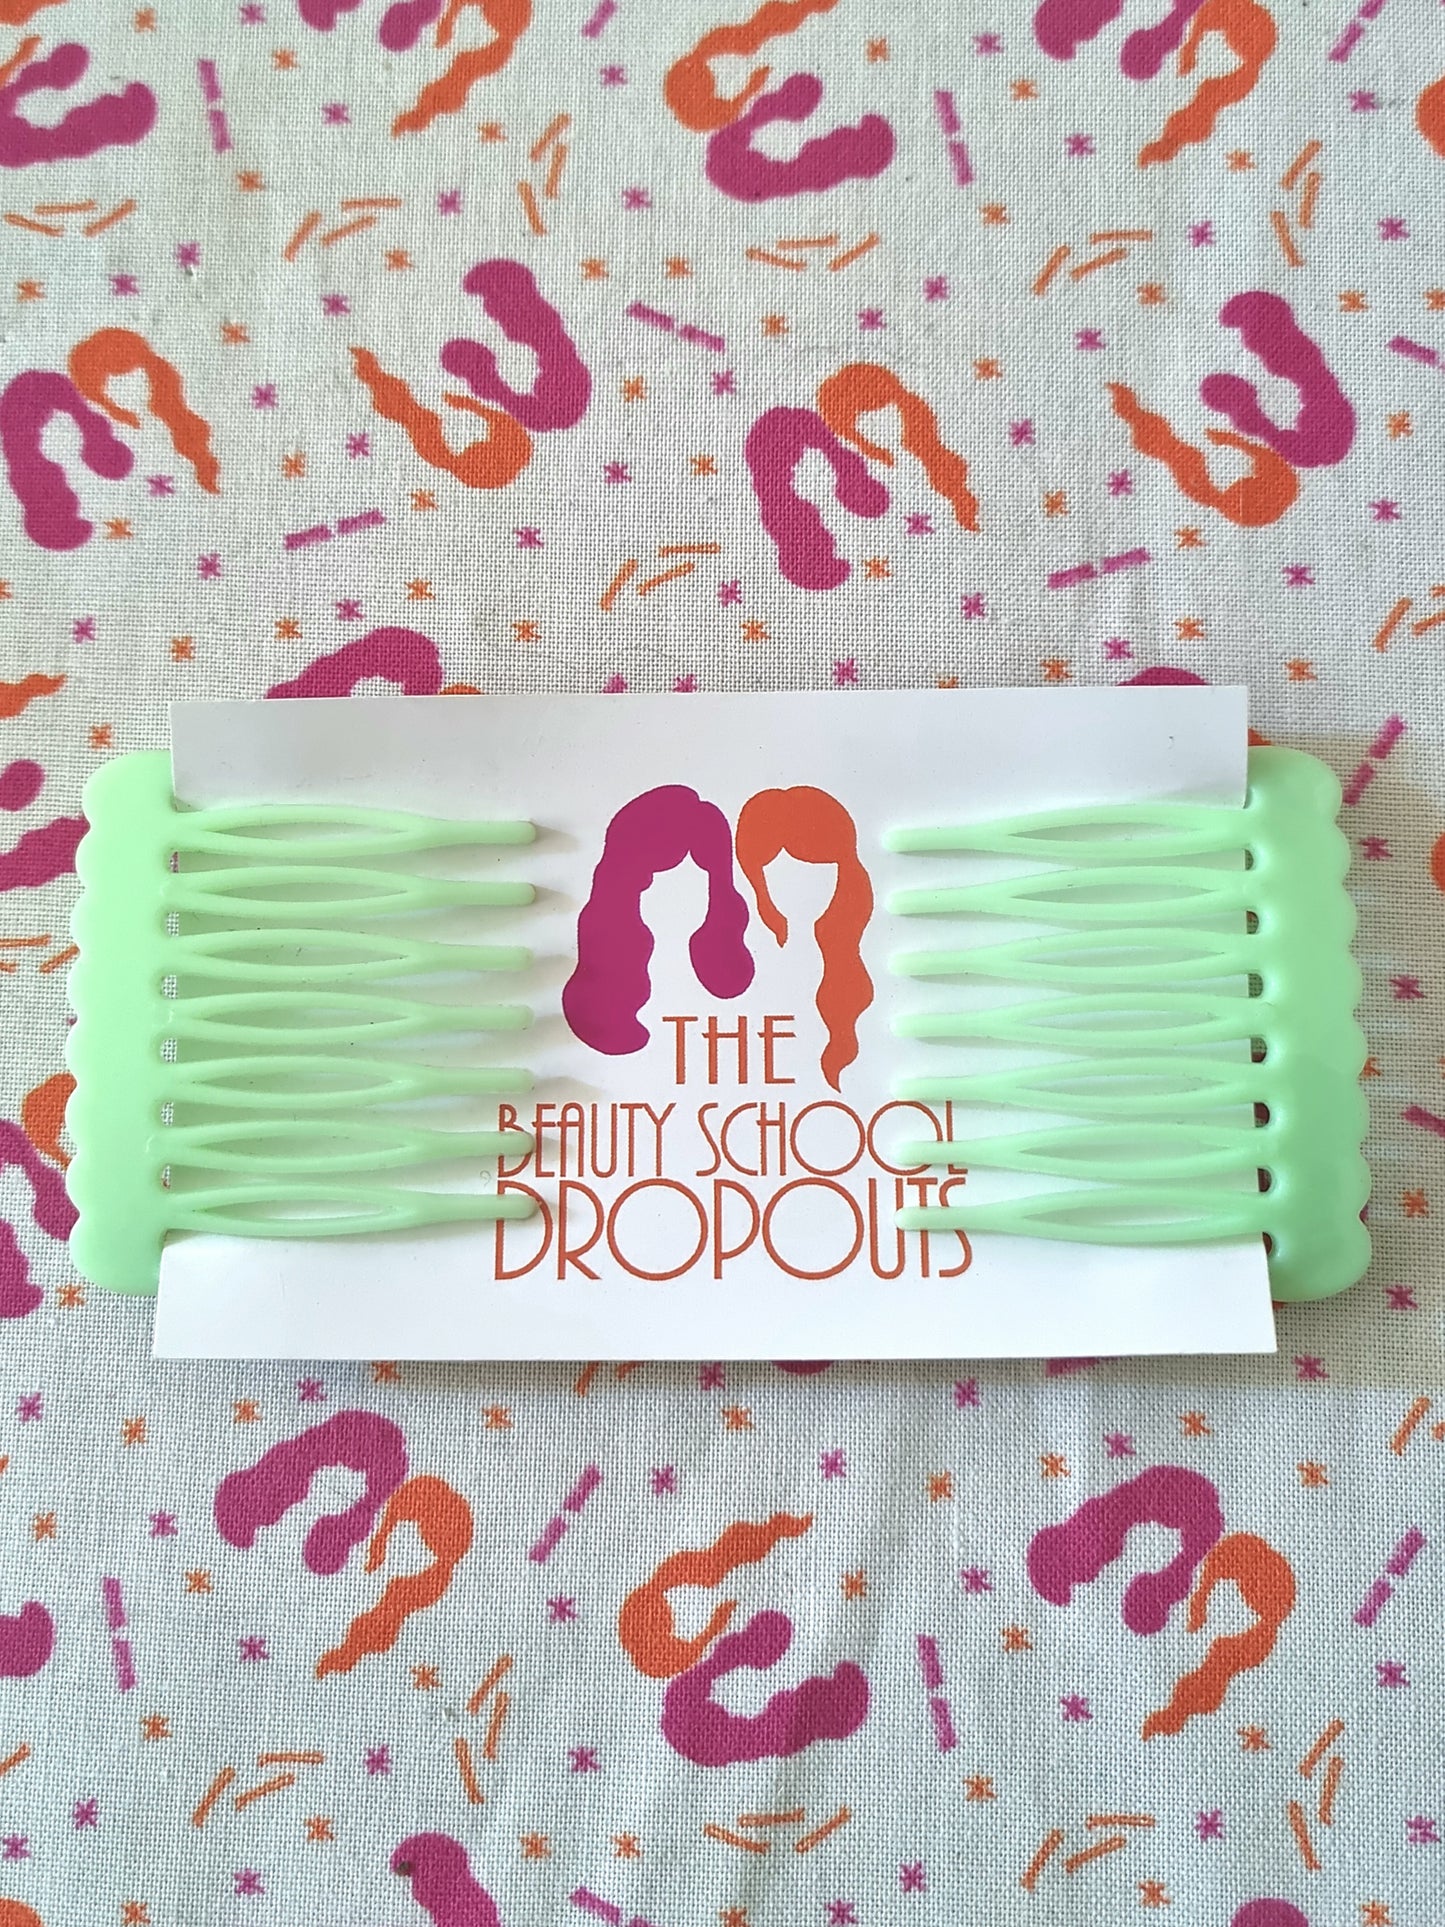 Candy Coloured Mini Side Combs - 2 Pack